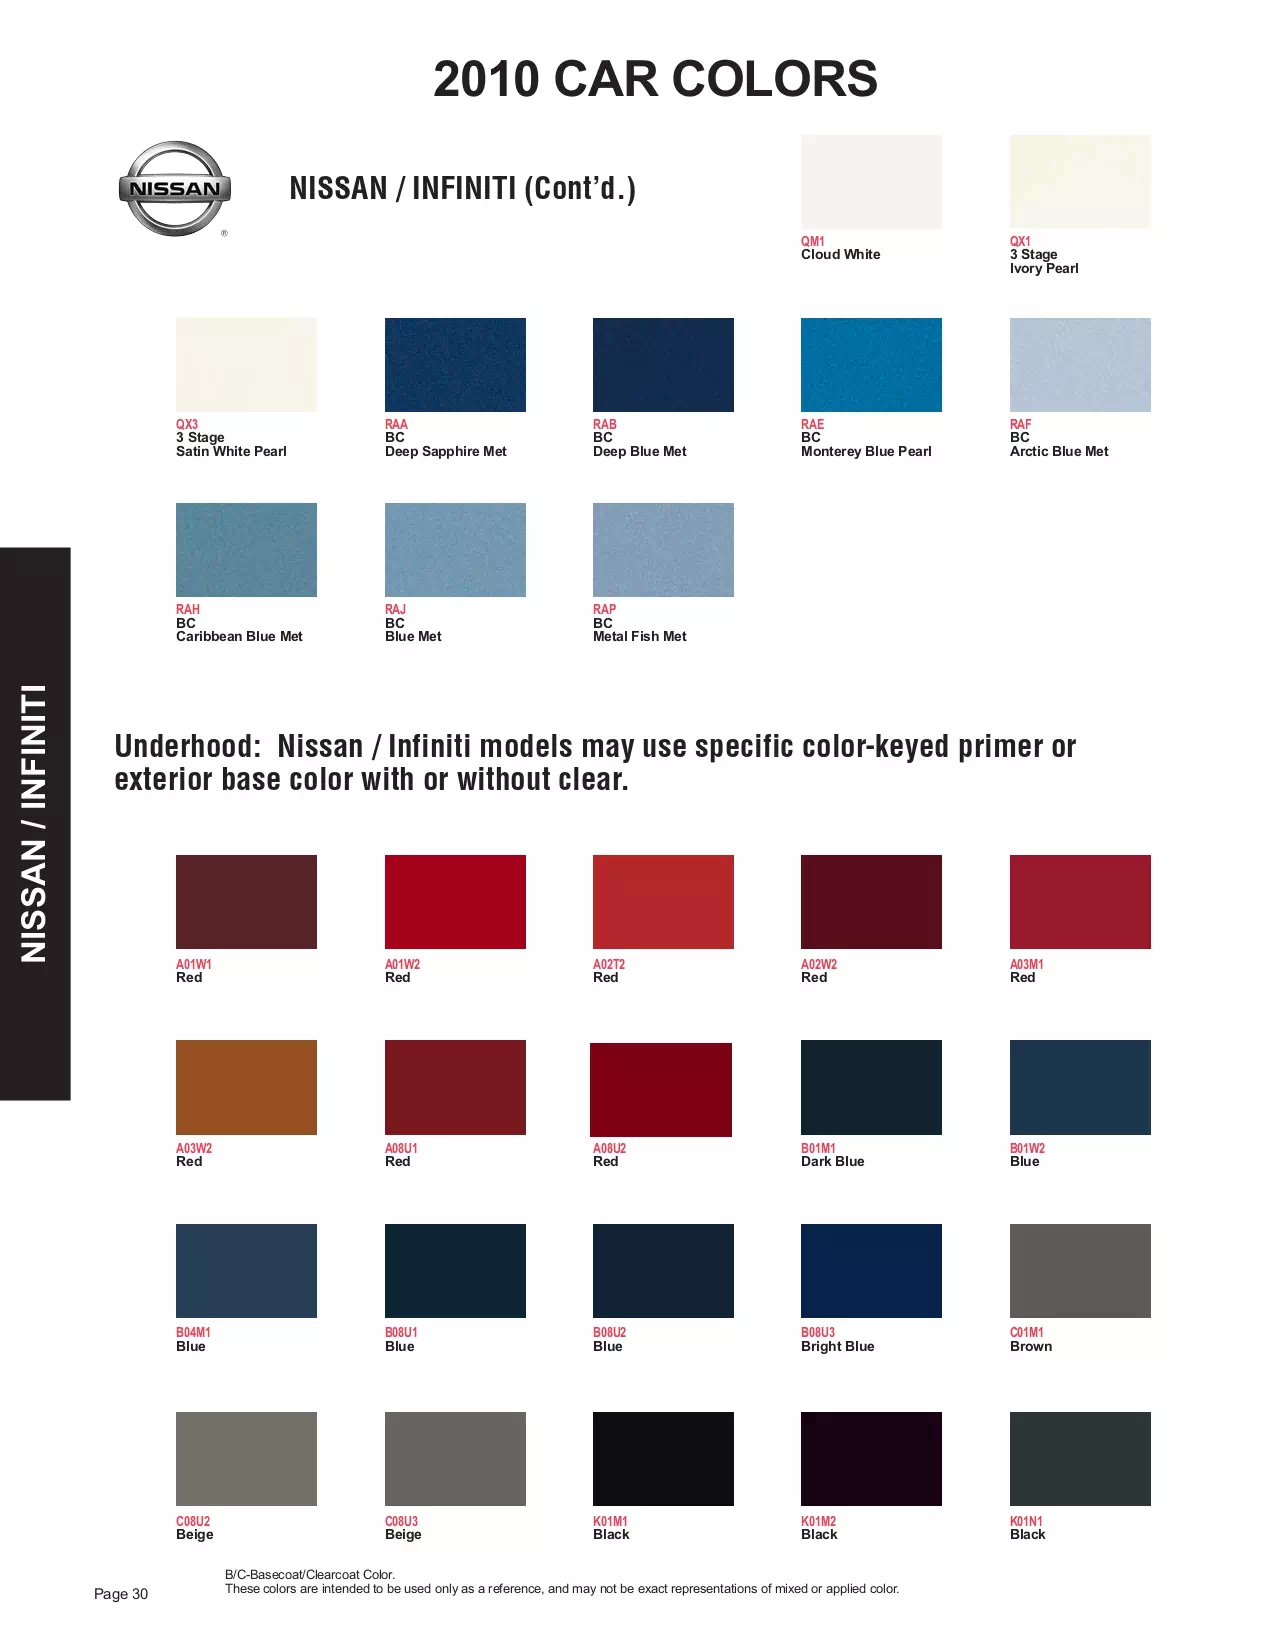 Exterior paint colors for Nissan and Infiniti vehicles and their ordering codes and stock numbers